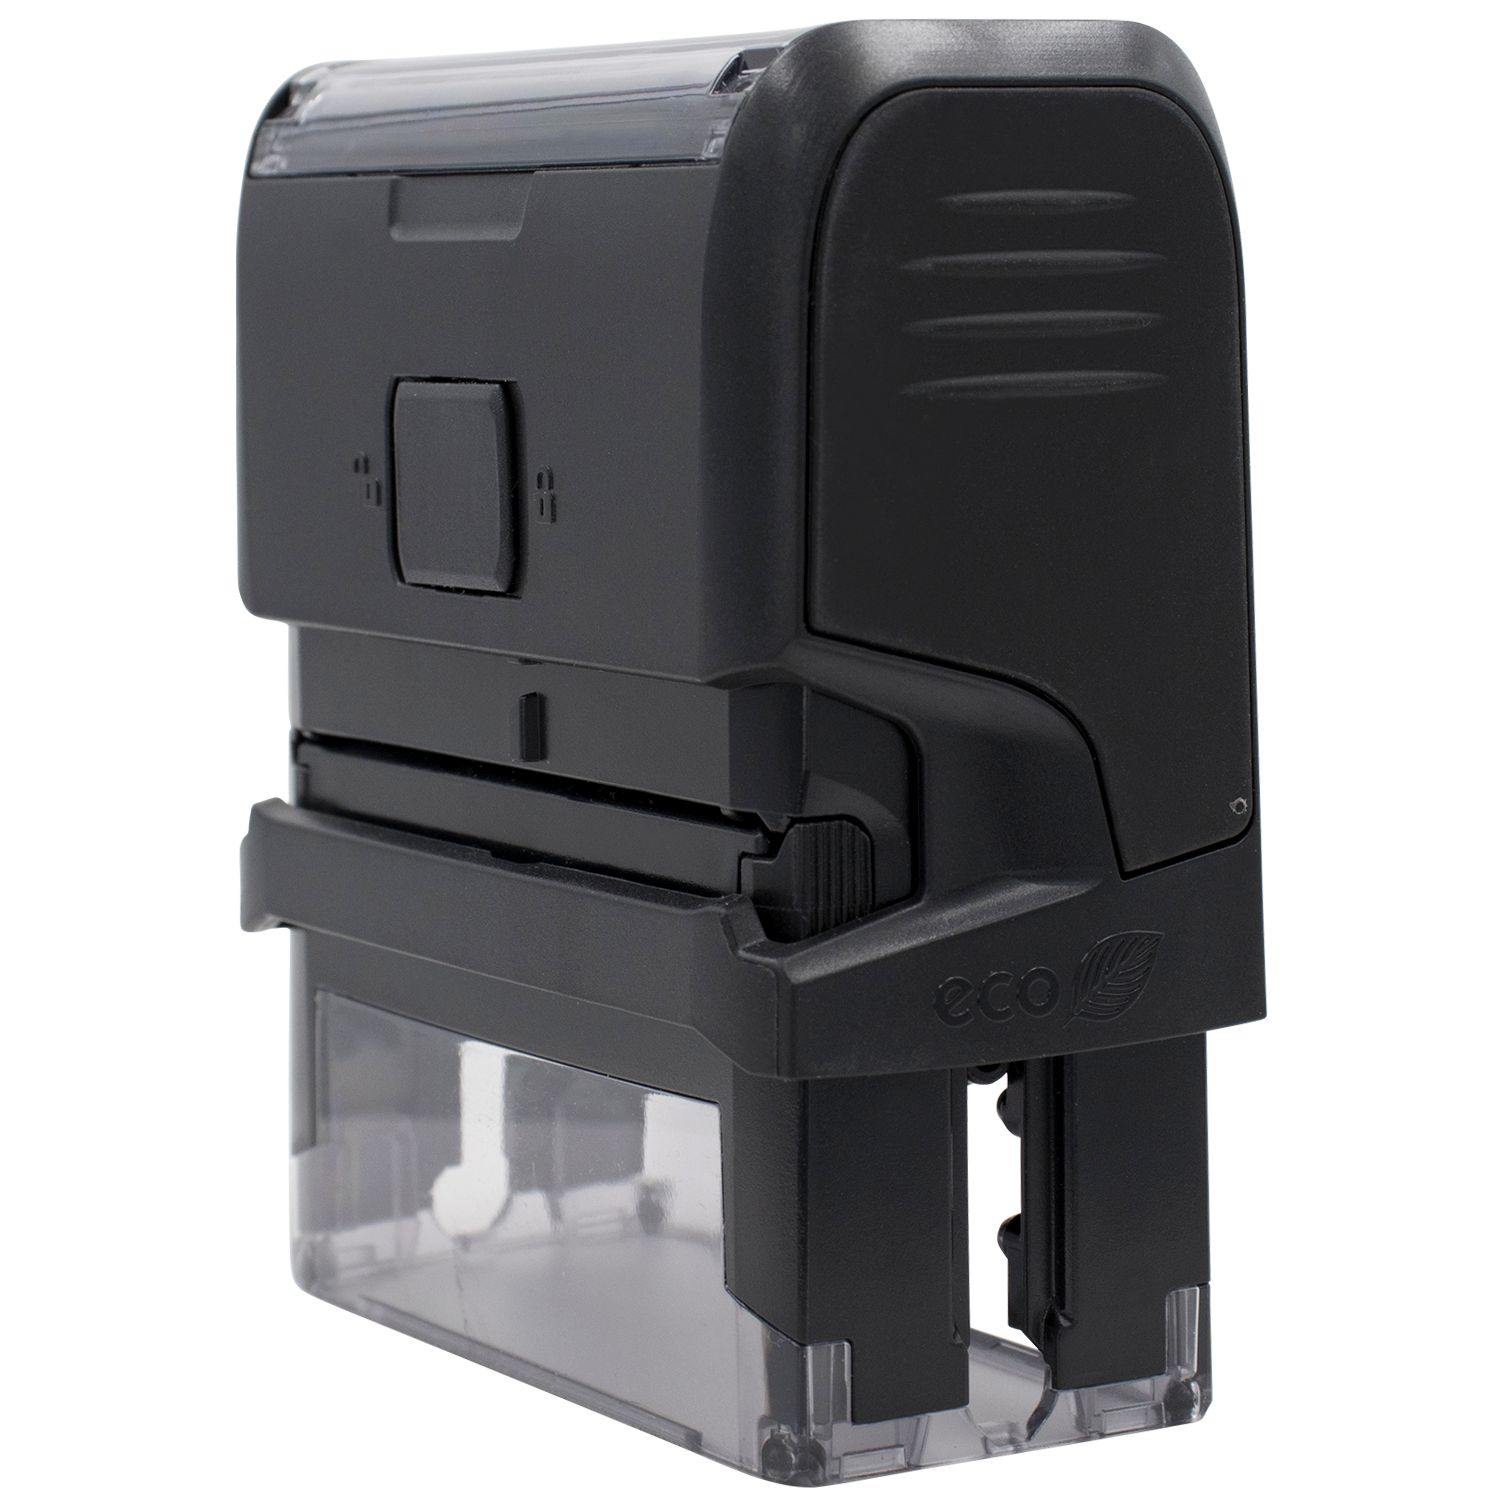 Side View of Large Self-Inking Cleaned and Sanitized Stamp at an Angle